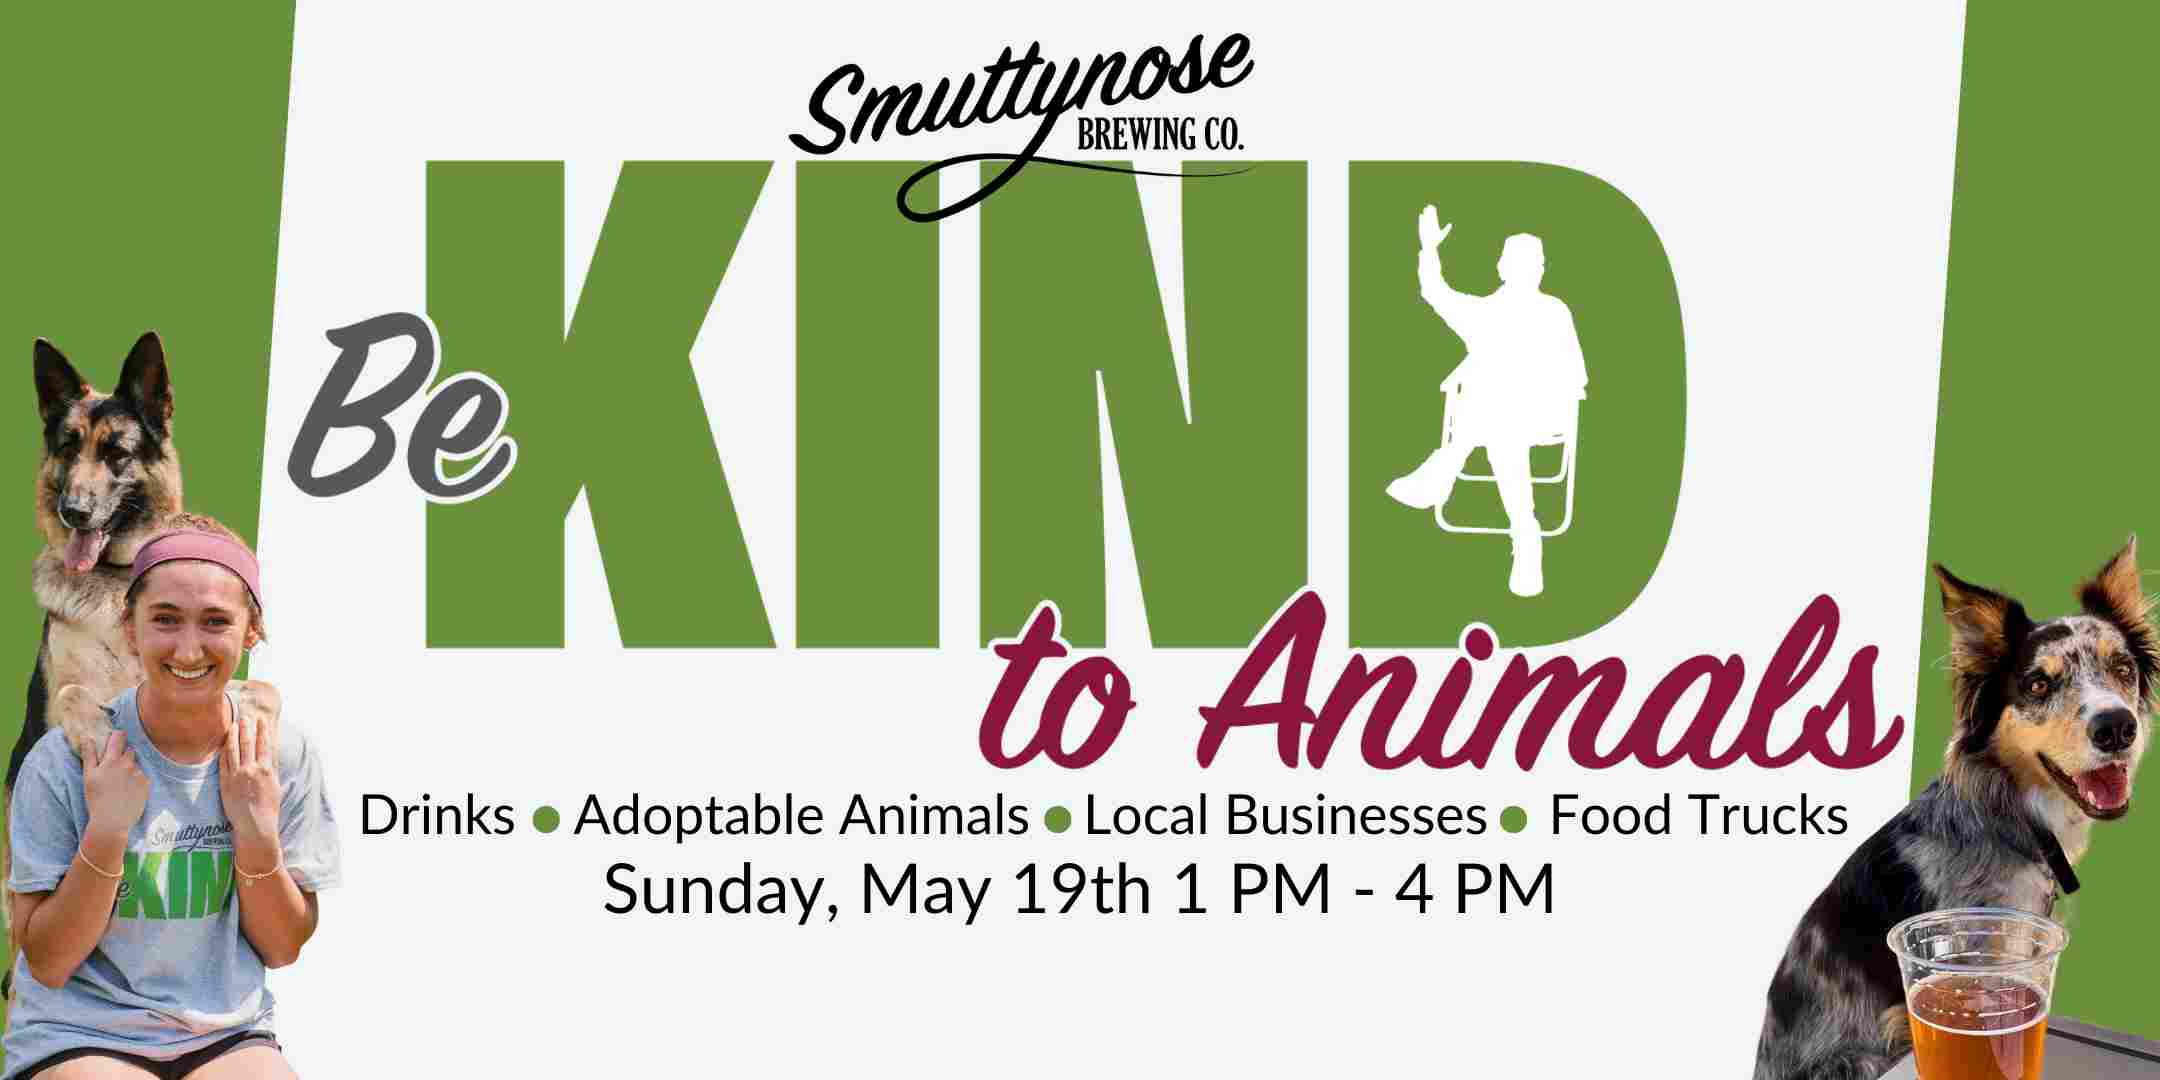 Be KIND to Animals event at Smuttynose. This festival will have adoptable animals, local businesses, and raffle prizes. Enjoy a Sunday on the field behind the Smuttynose Brewery. Food trucks will be onsite. The bar will be open. Free admission.